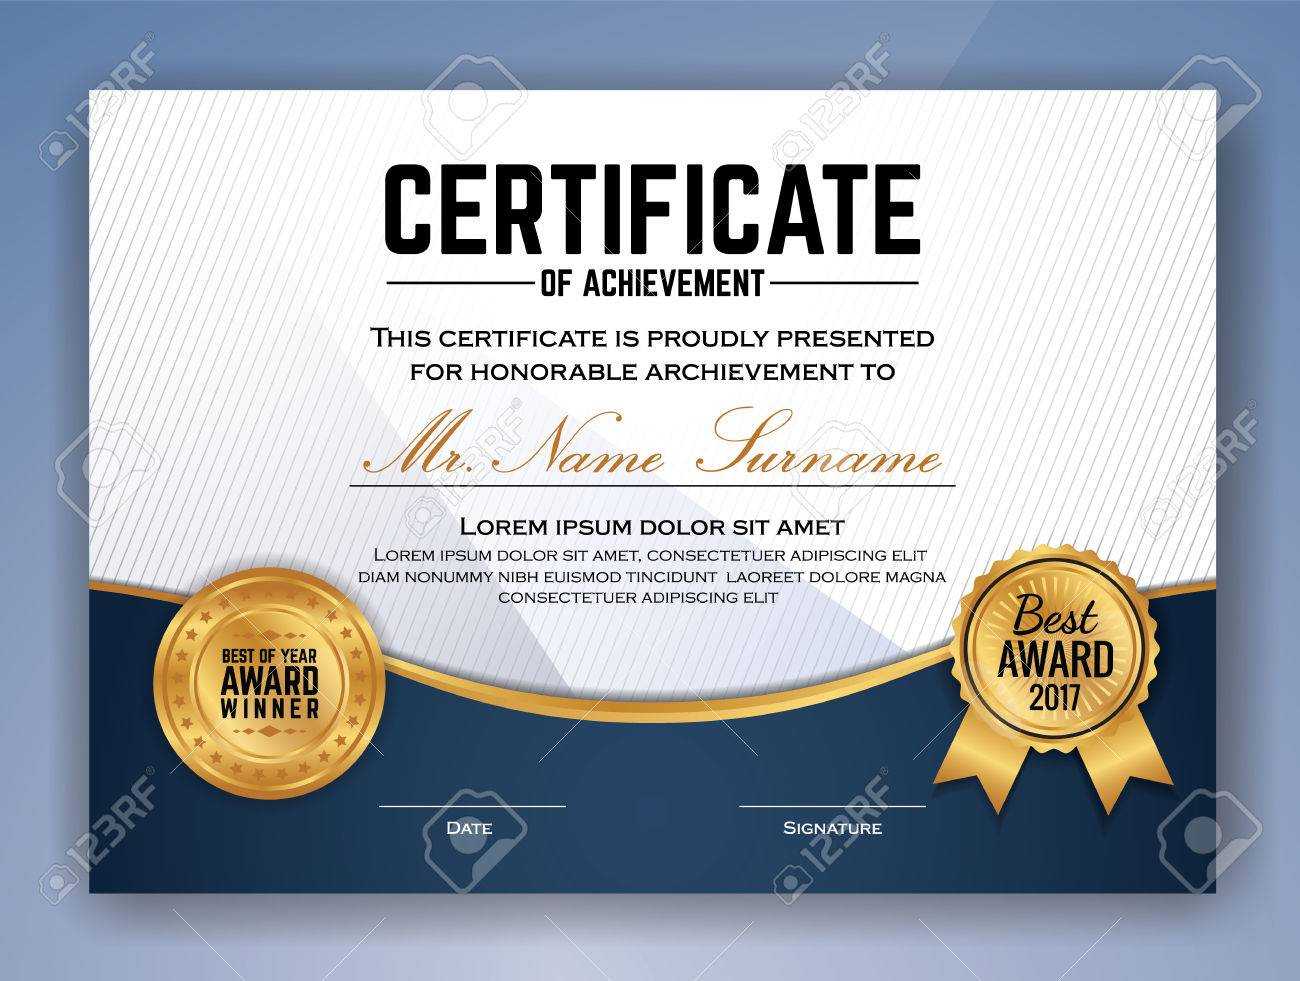 Multipurpose Professional Certificate Template Design For Print With Professional Award Certificate Template